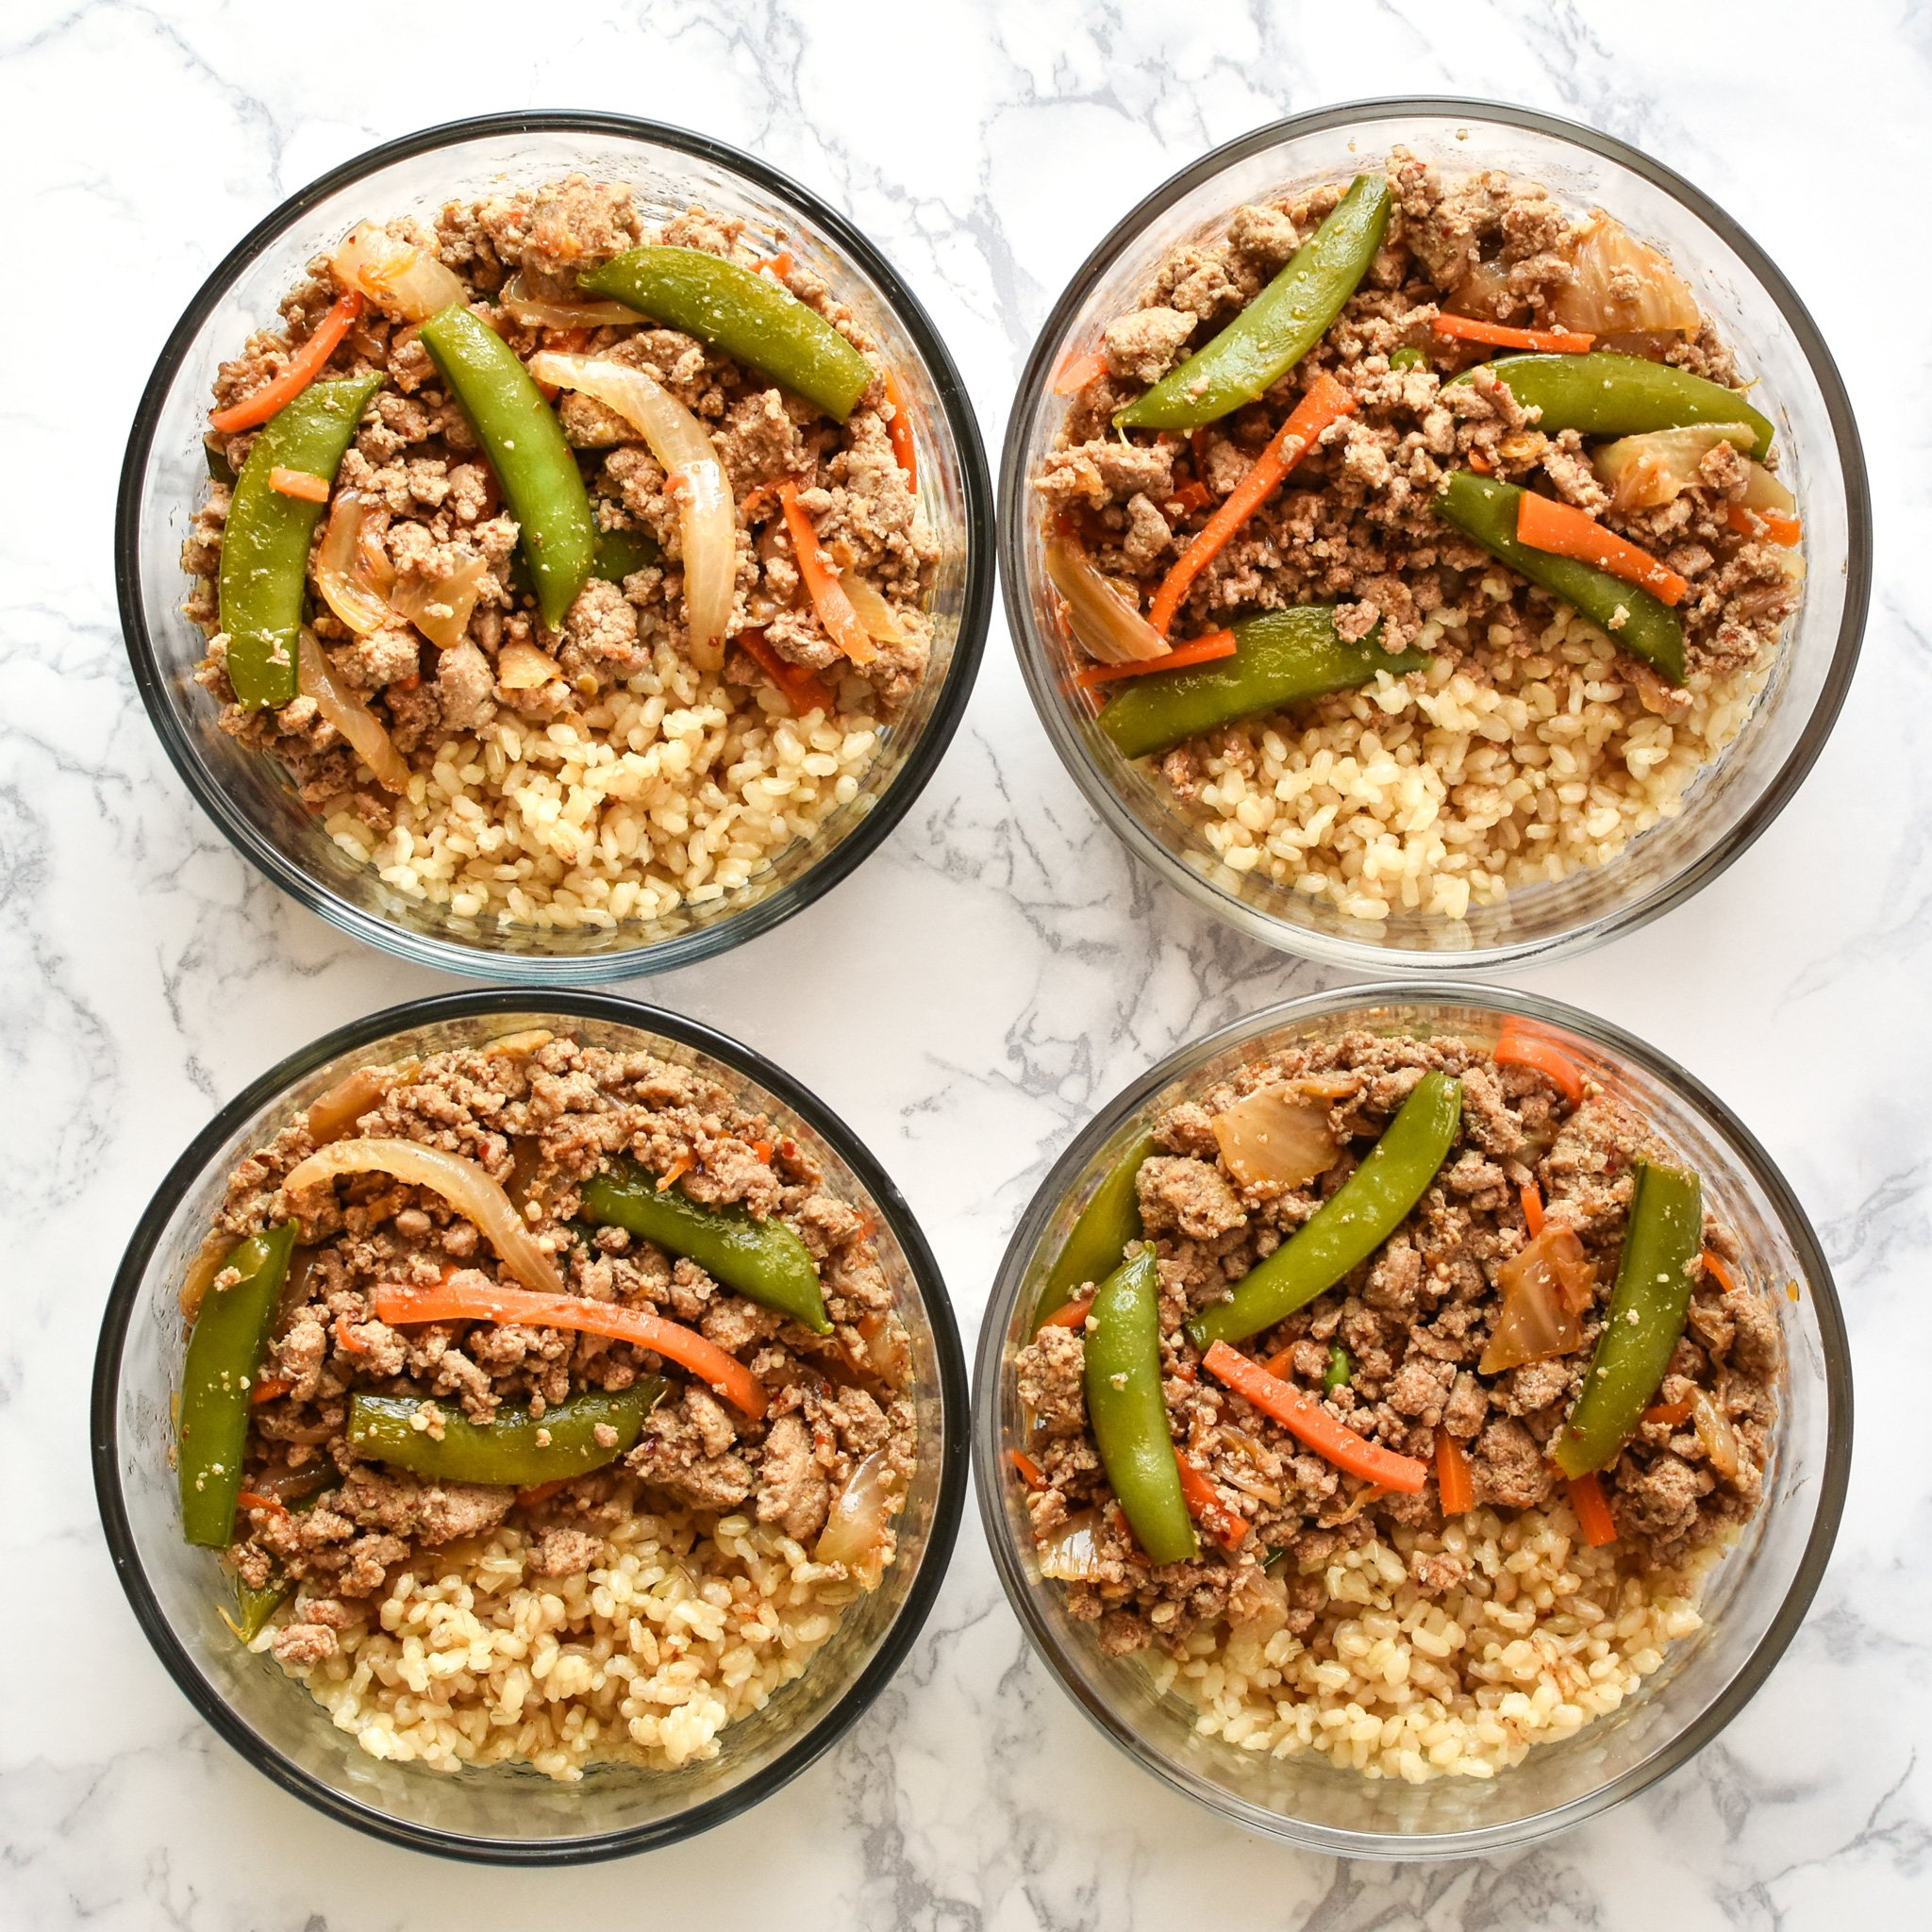 Meal Prep Ground Turkey Snap Pea Stir Fry Rice Bowls - A delicious recipe for veggie filled stir fry, super easy to meal prep for lunch! - ProjectMealPlan.com